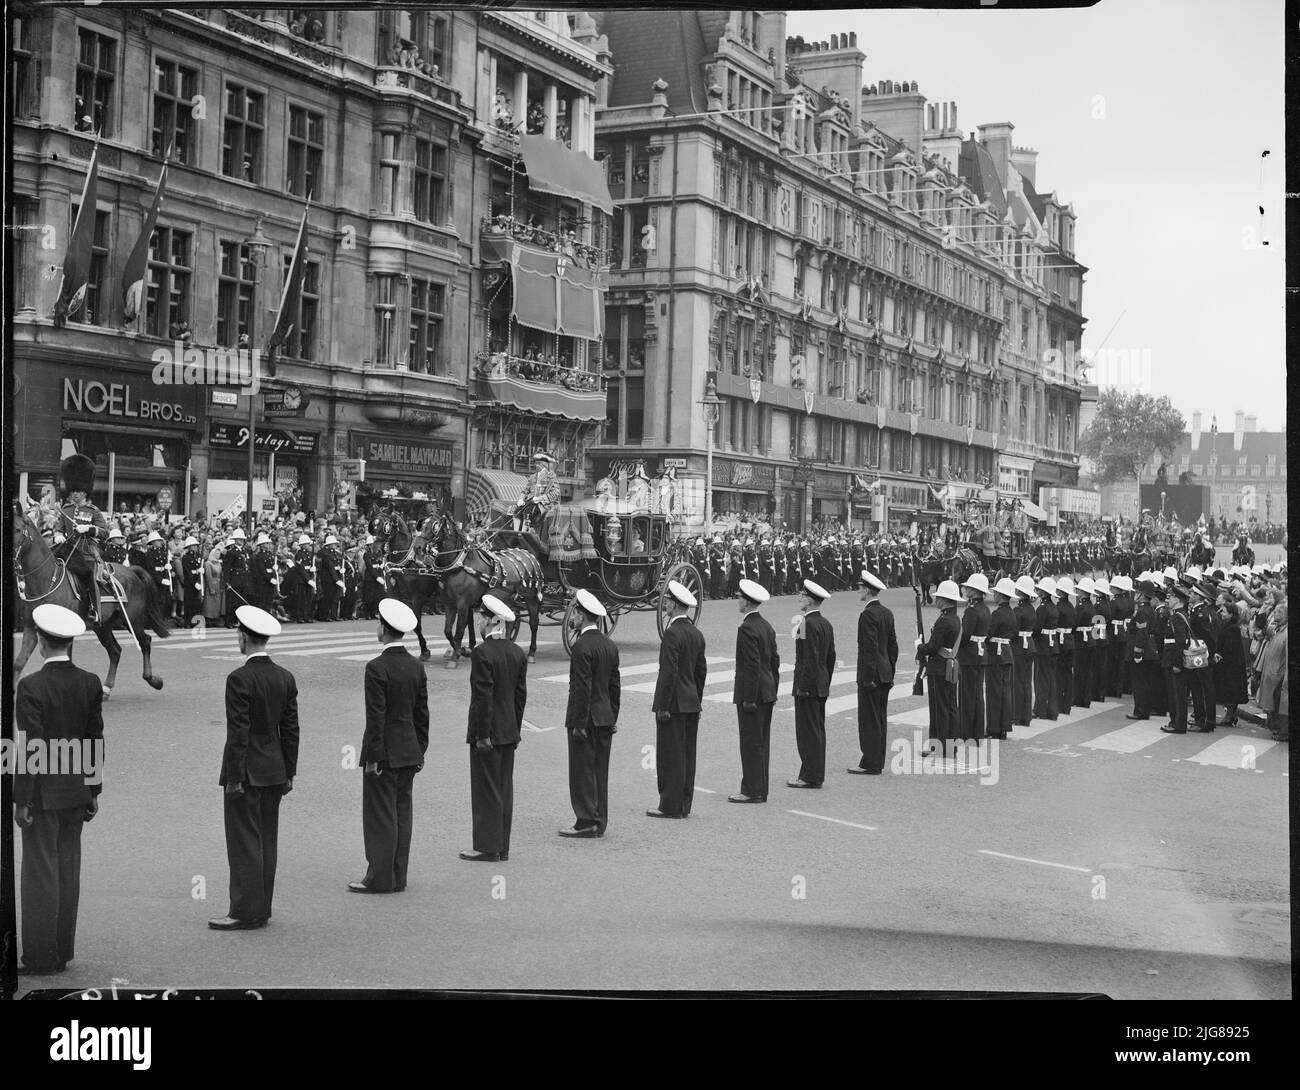 Coronation of Queen Elizabeth II, Bridge Steet, Westminster, City of Westminster, Greater London Authority, 02-06-1953. Members of the armed forces lining Bridge Street as the coronation procession of Queen Elizabeth II passes by, with the coach carrying Princess Margaret and the Queen Mother in the foreground. Stock Photo